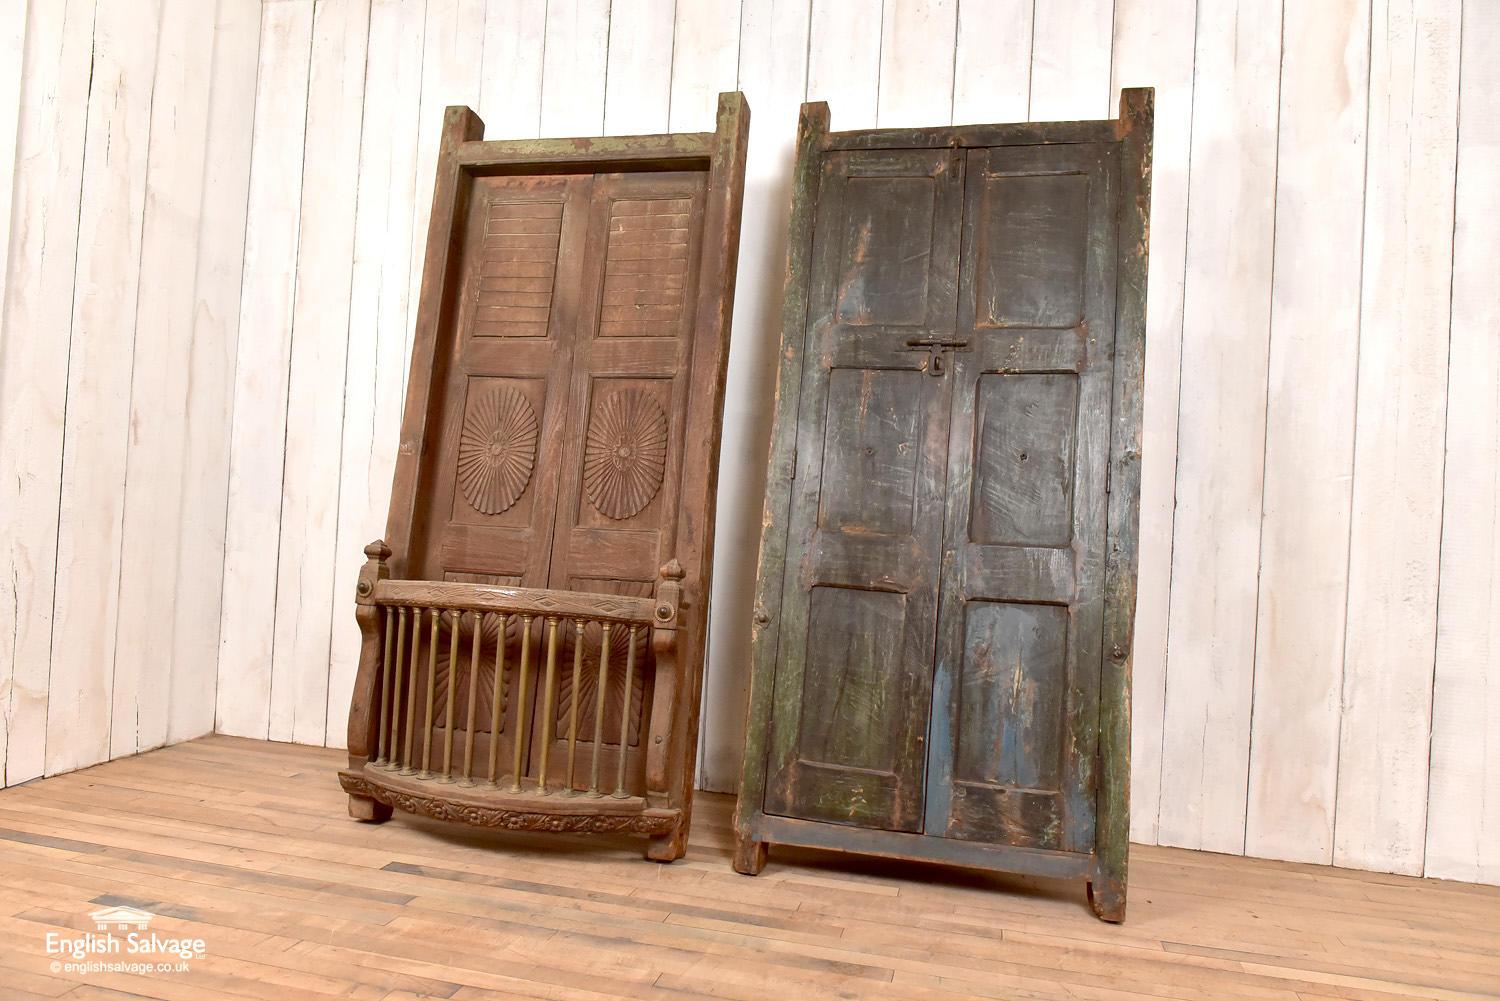 Two matching pairs of teak balcony windows/shutters/doors. The balcony fronts could be removed by the purchaser as they attach to the front of the frame, although there will presumably some marks/holes where these detach. Nice carved detail to the